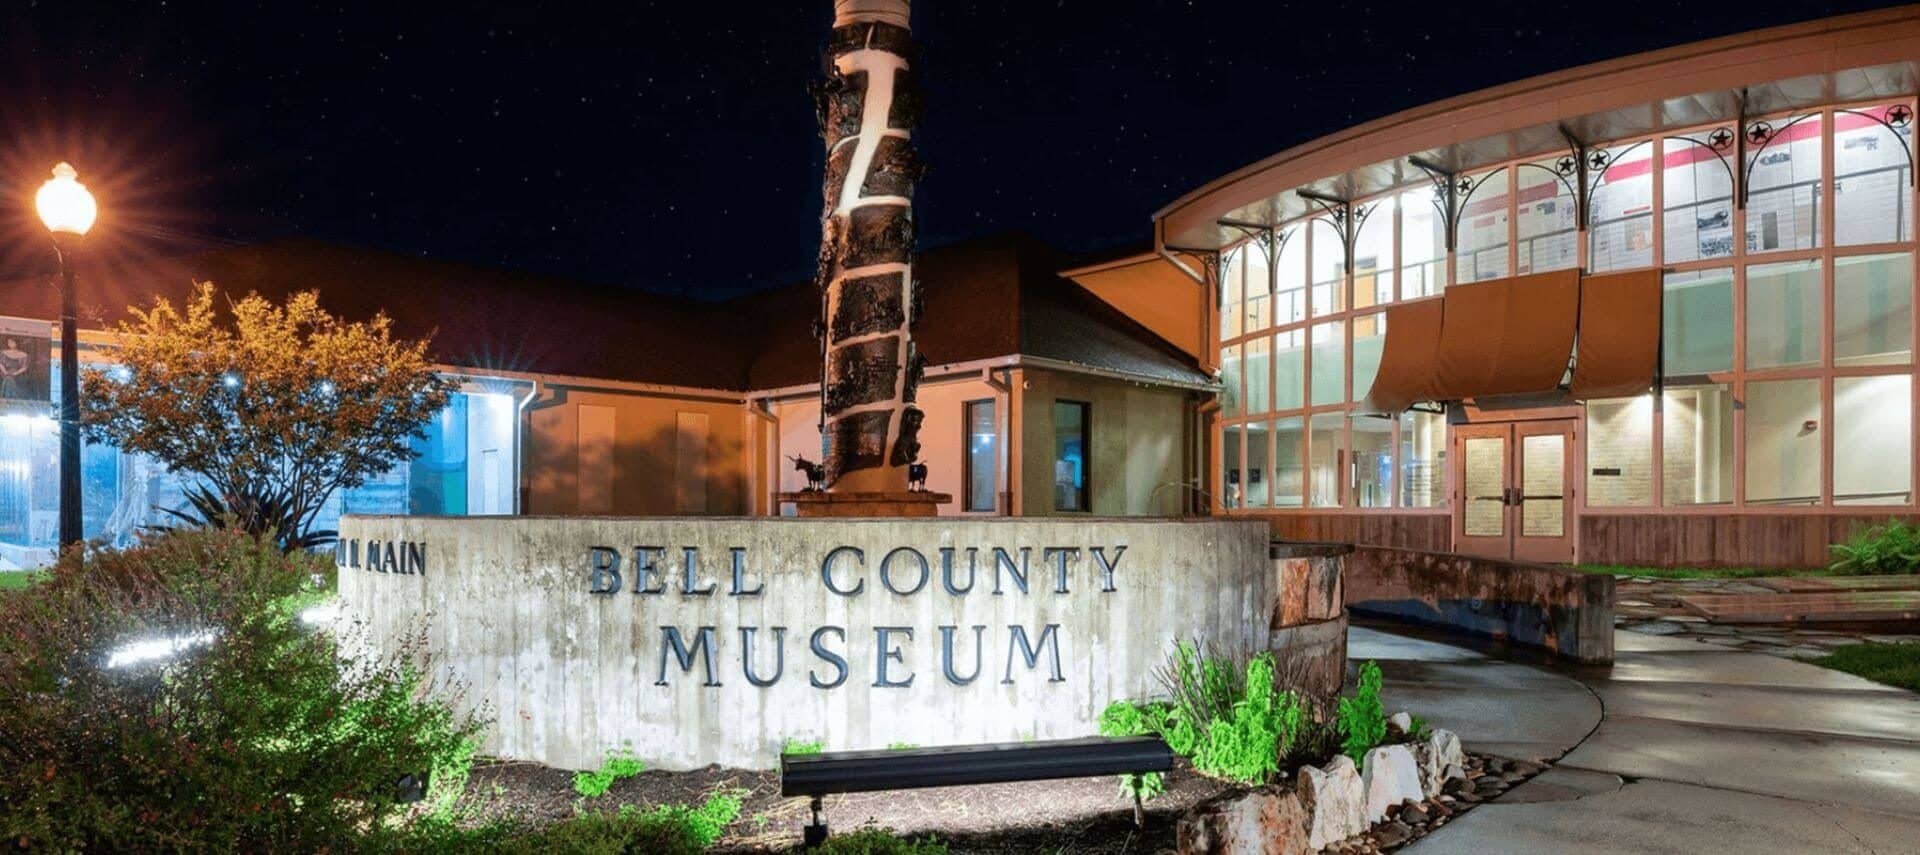 a night time photo of the Bell County Museum with multiple story glass windowed circular building and green bushes and srubs, along with a concrete walkway